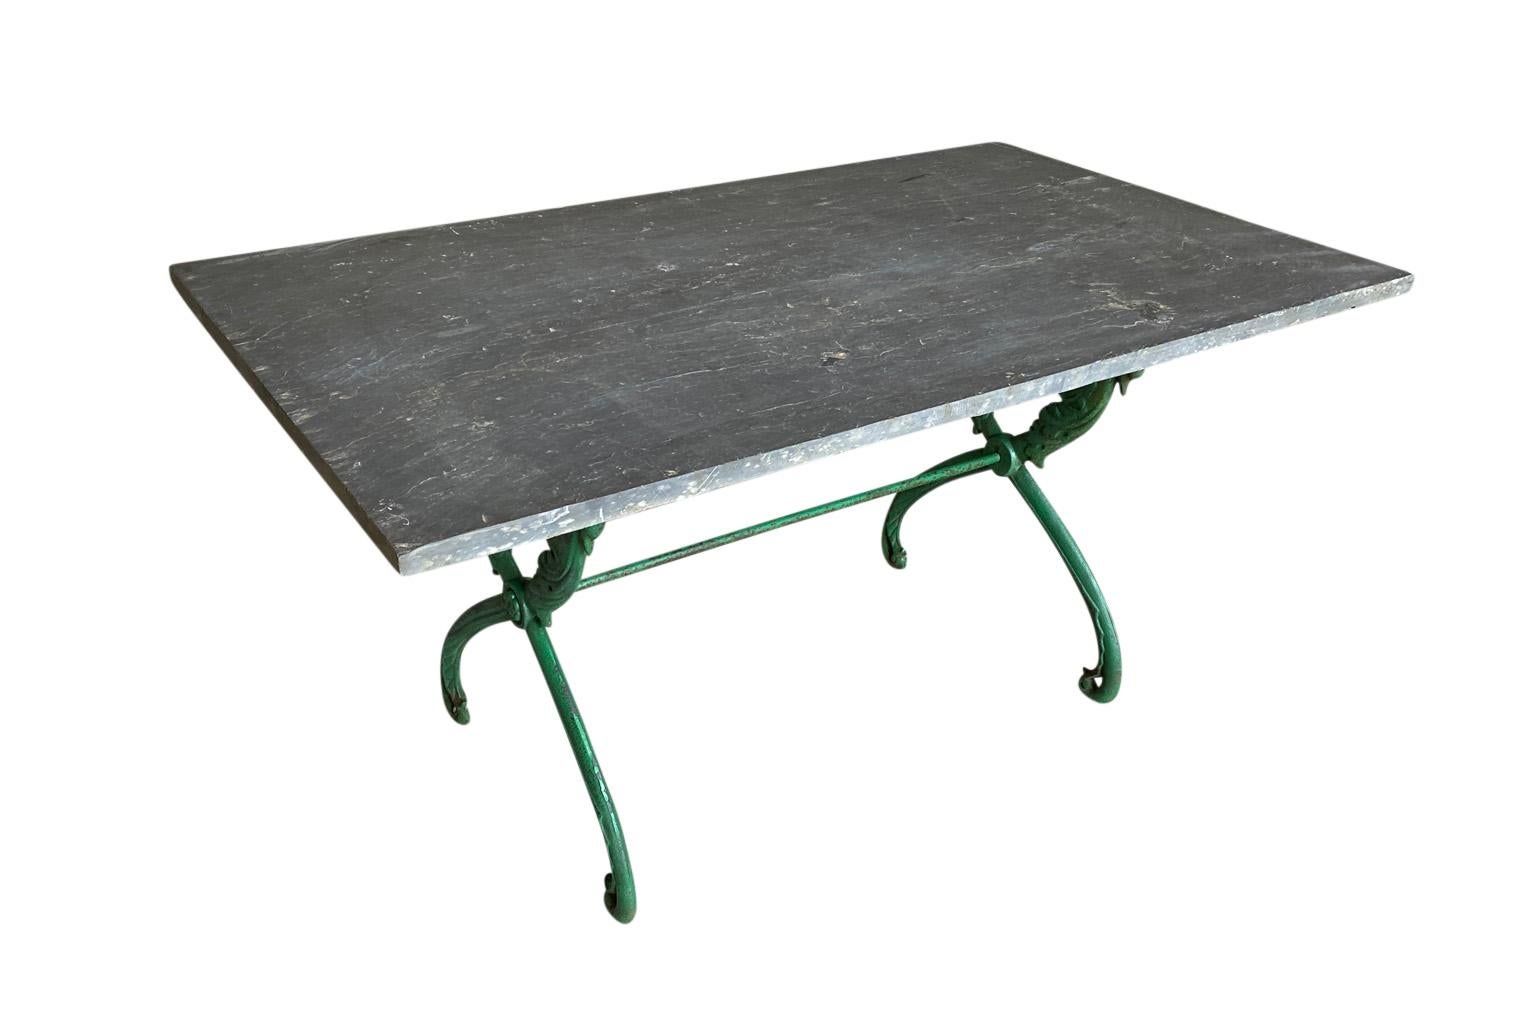 A very lovely later 19th century garden table from the South of France beautifully constructed with a painted iron base and stone top. The legs are decorated with lovely swans. Perfect for any interior or exterior environment.